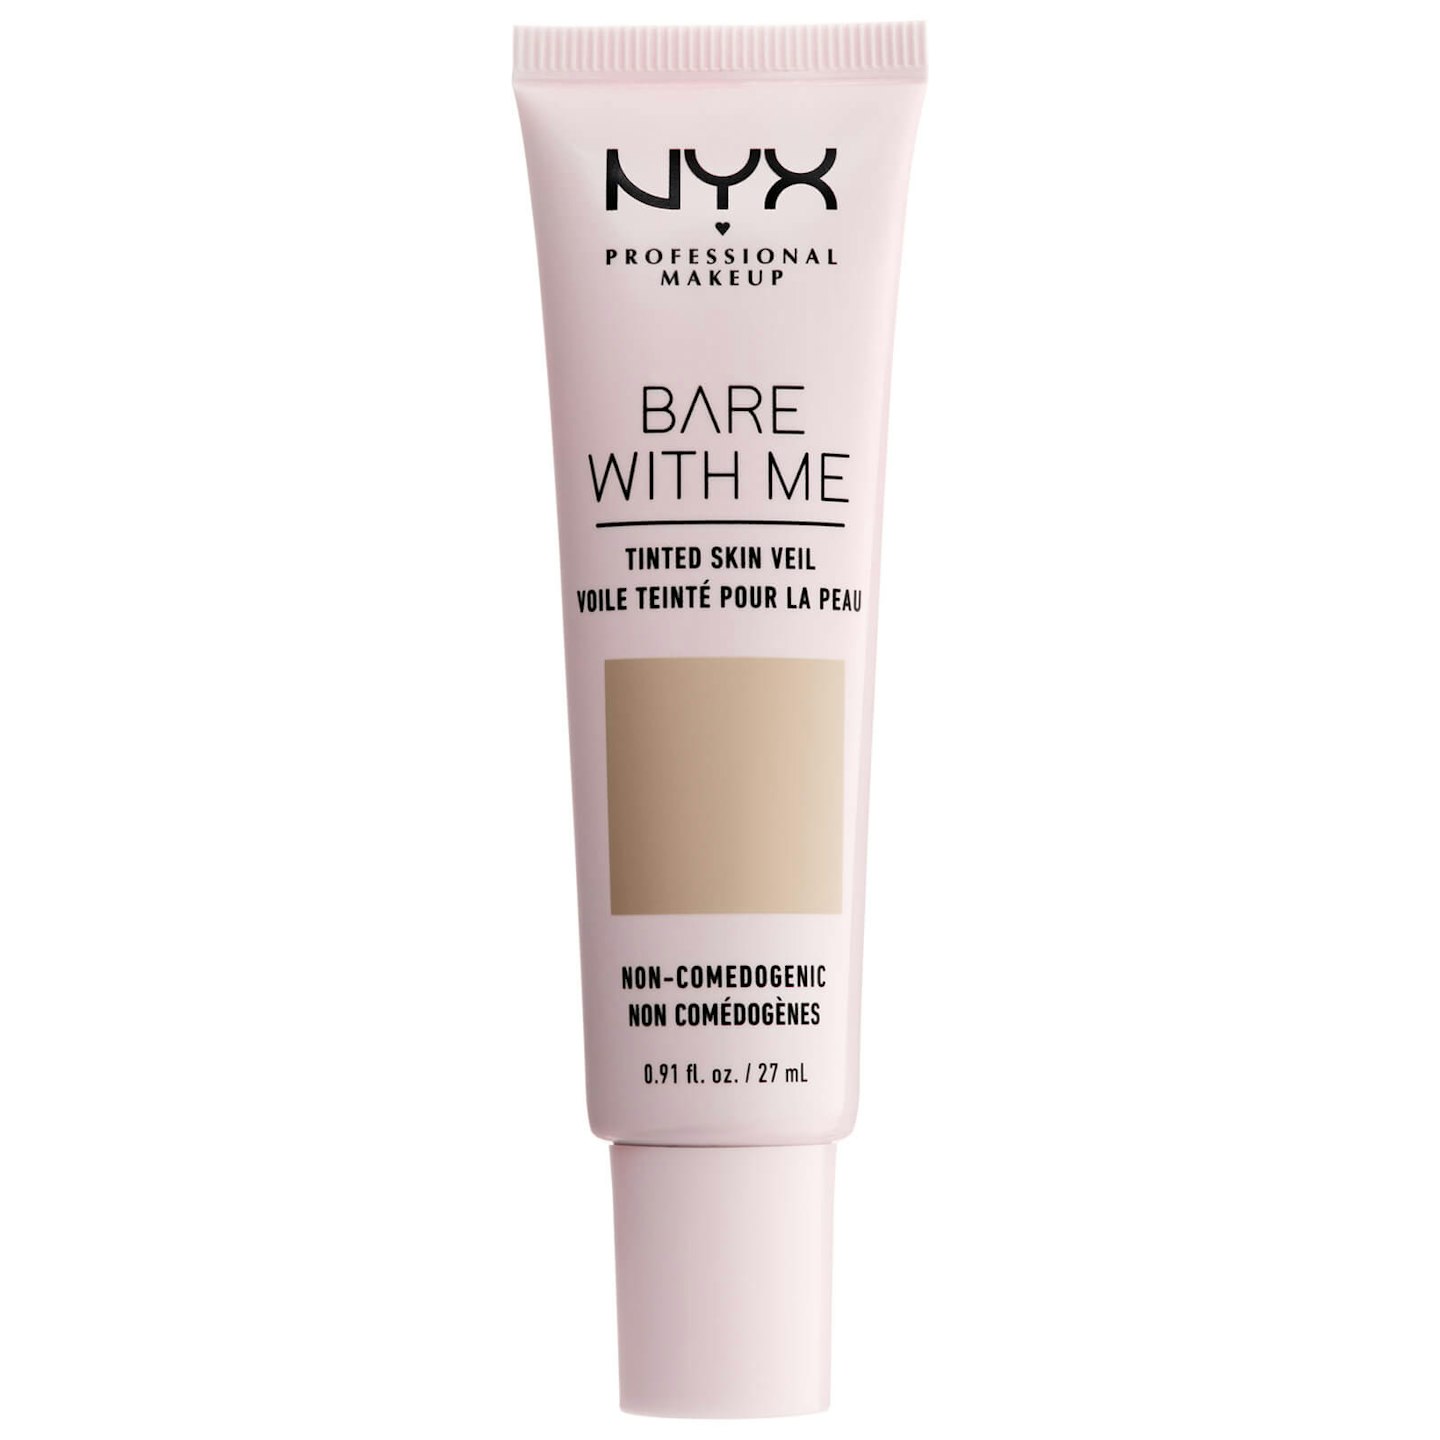 NYX Professional Makeup Bare With Me Tinted Skin Veil BB Cream, £10